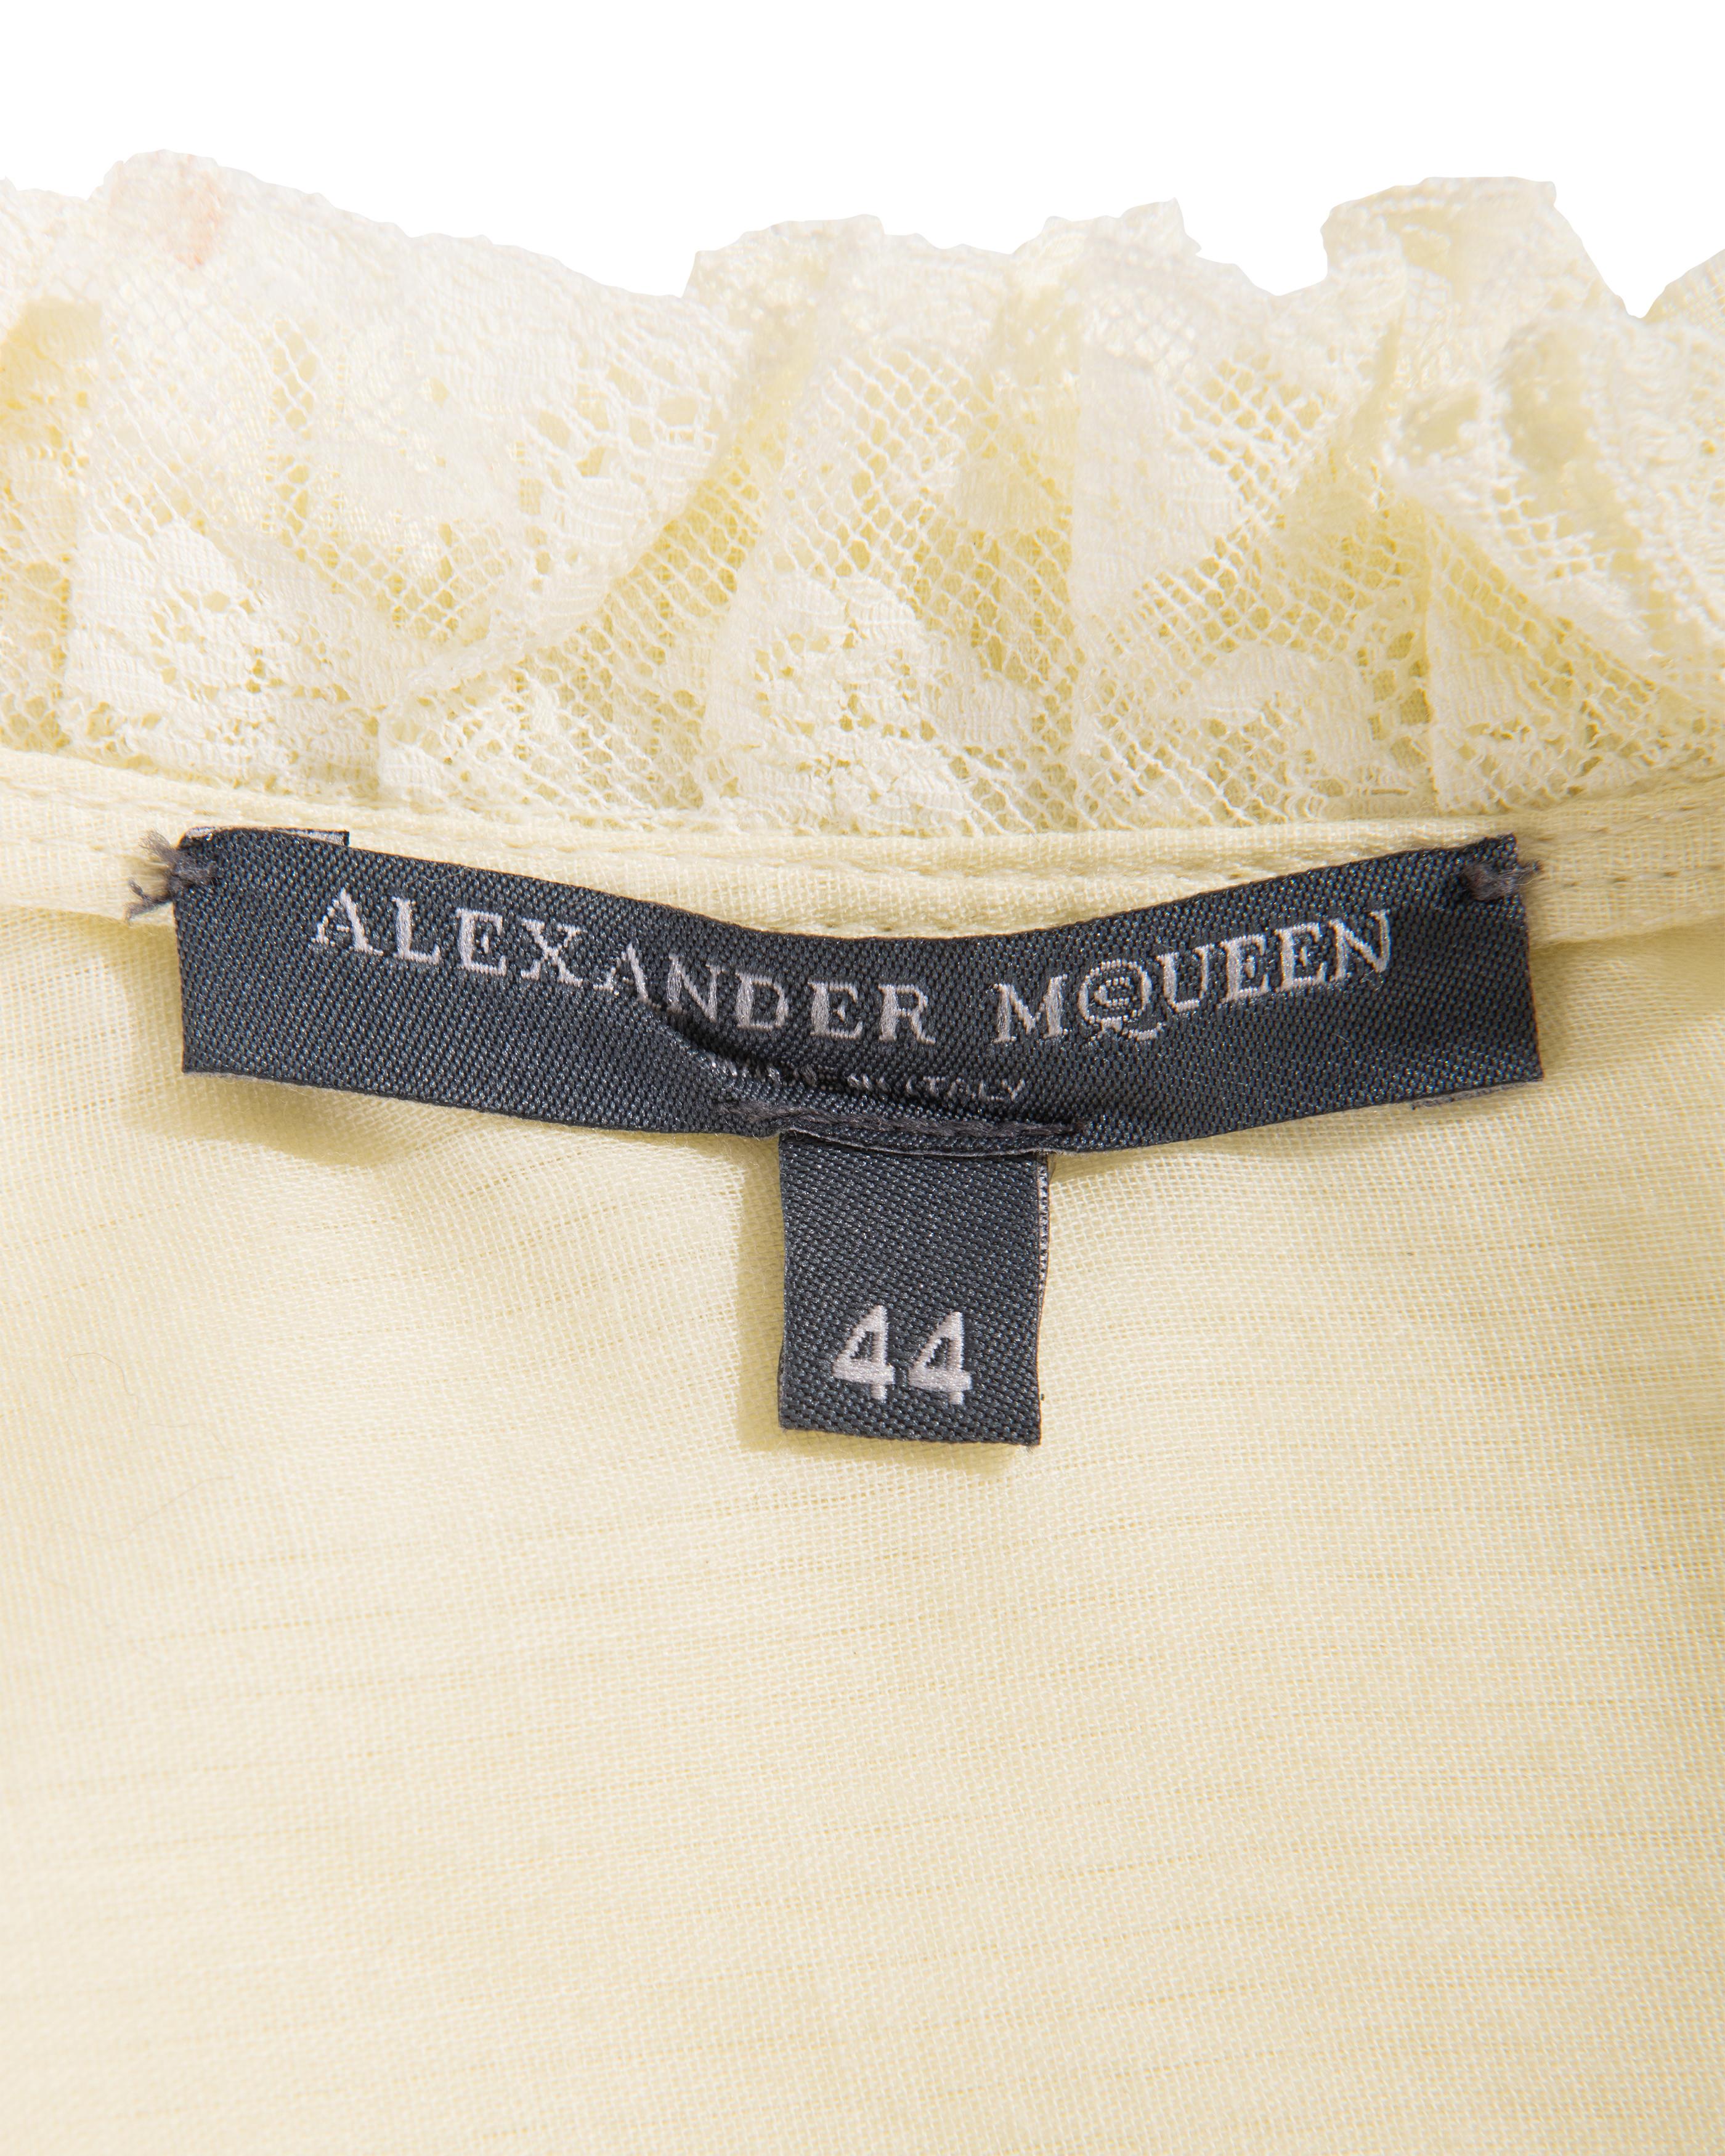 S/S 2005 Alexander McQueen (Lifetime) Pale Yellow Pleated and Lace Cotton Dress For Sale 5